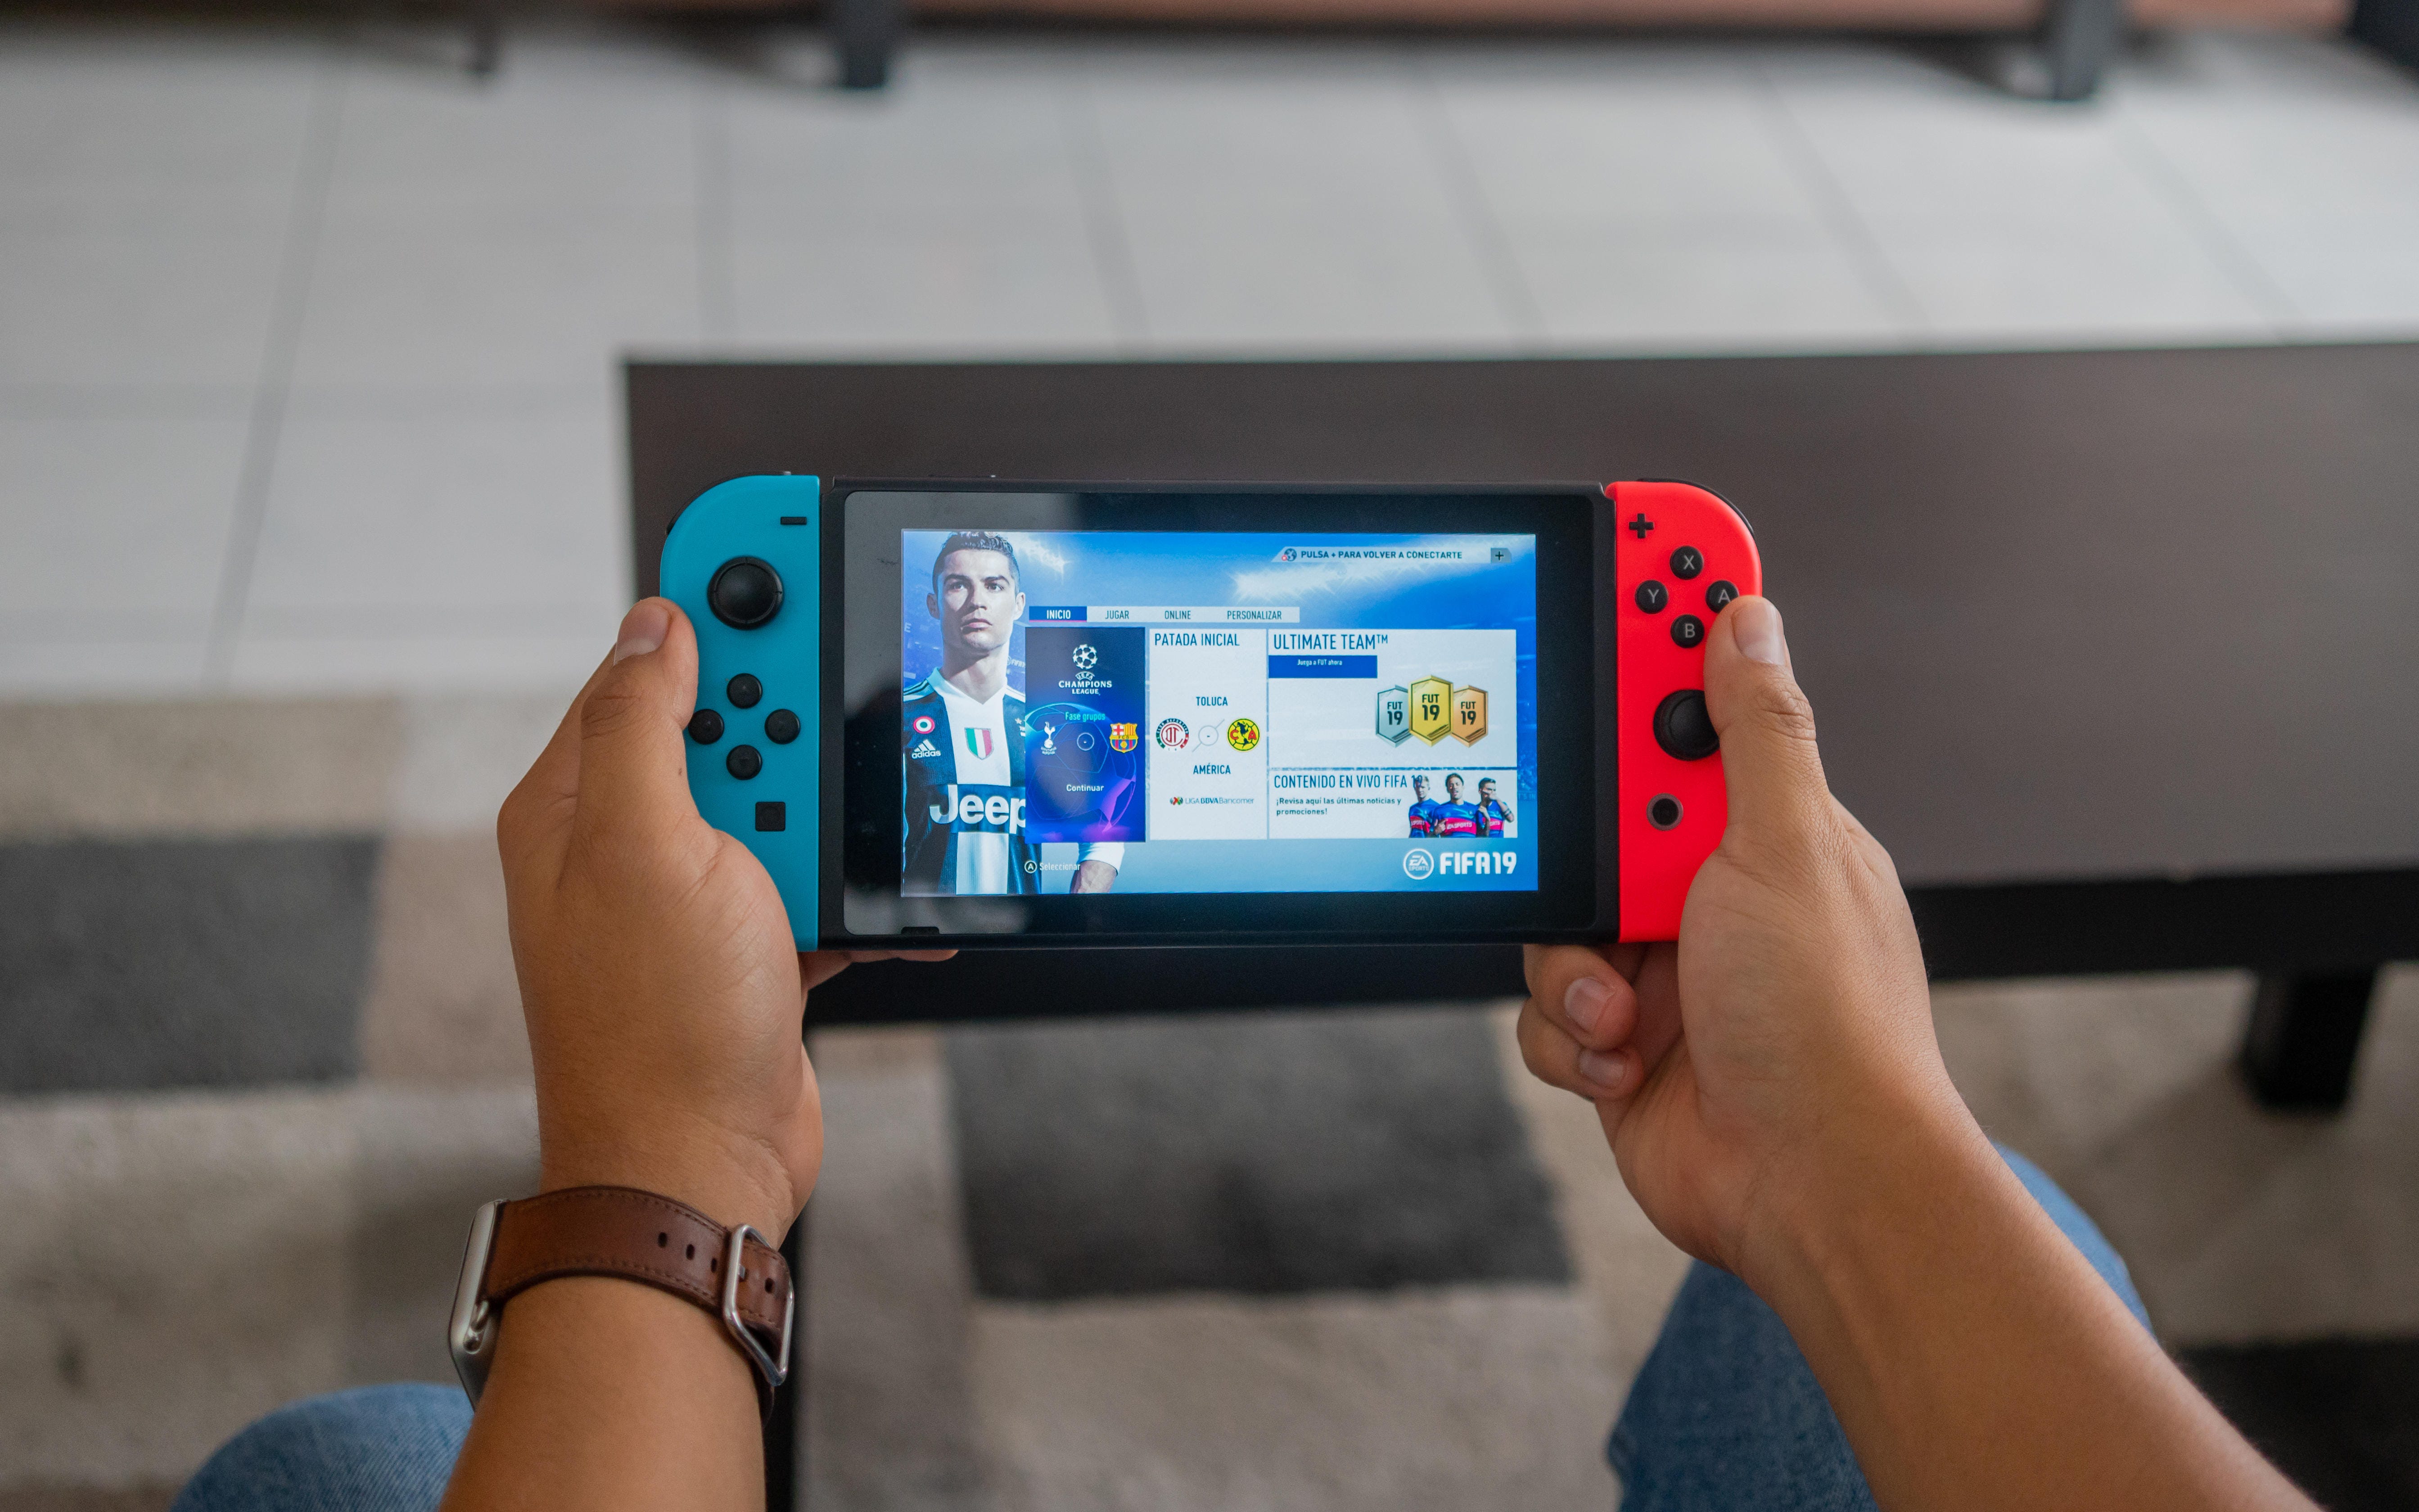 Make sure you don’t buy the wrong Nintendo Switch this Black Friday